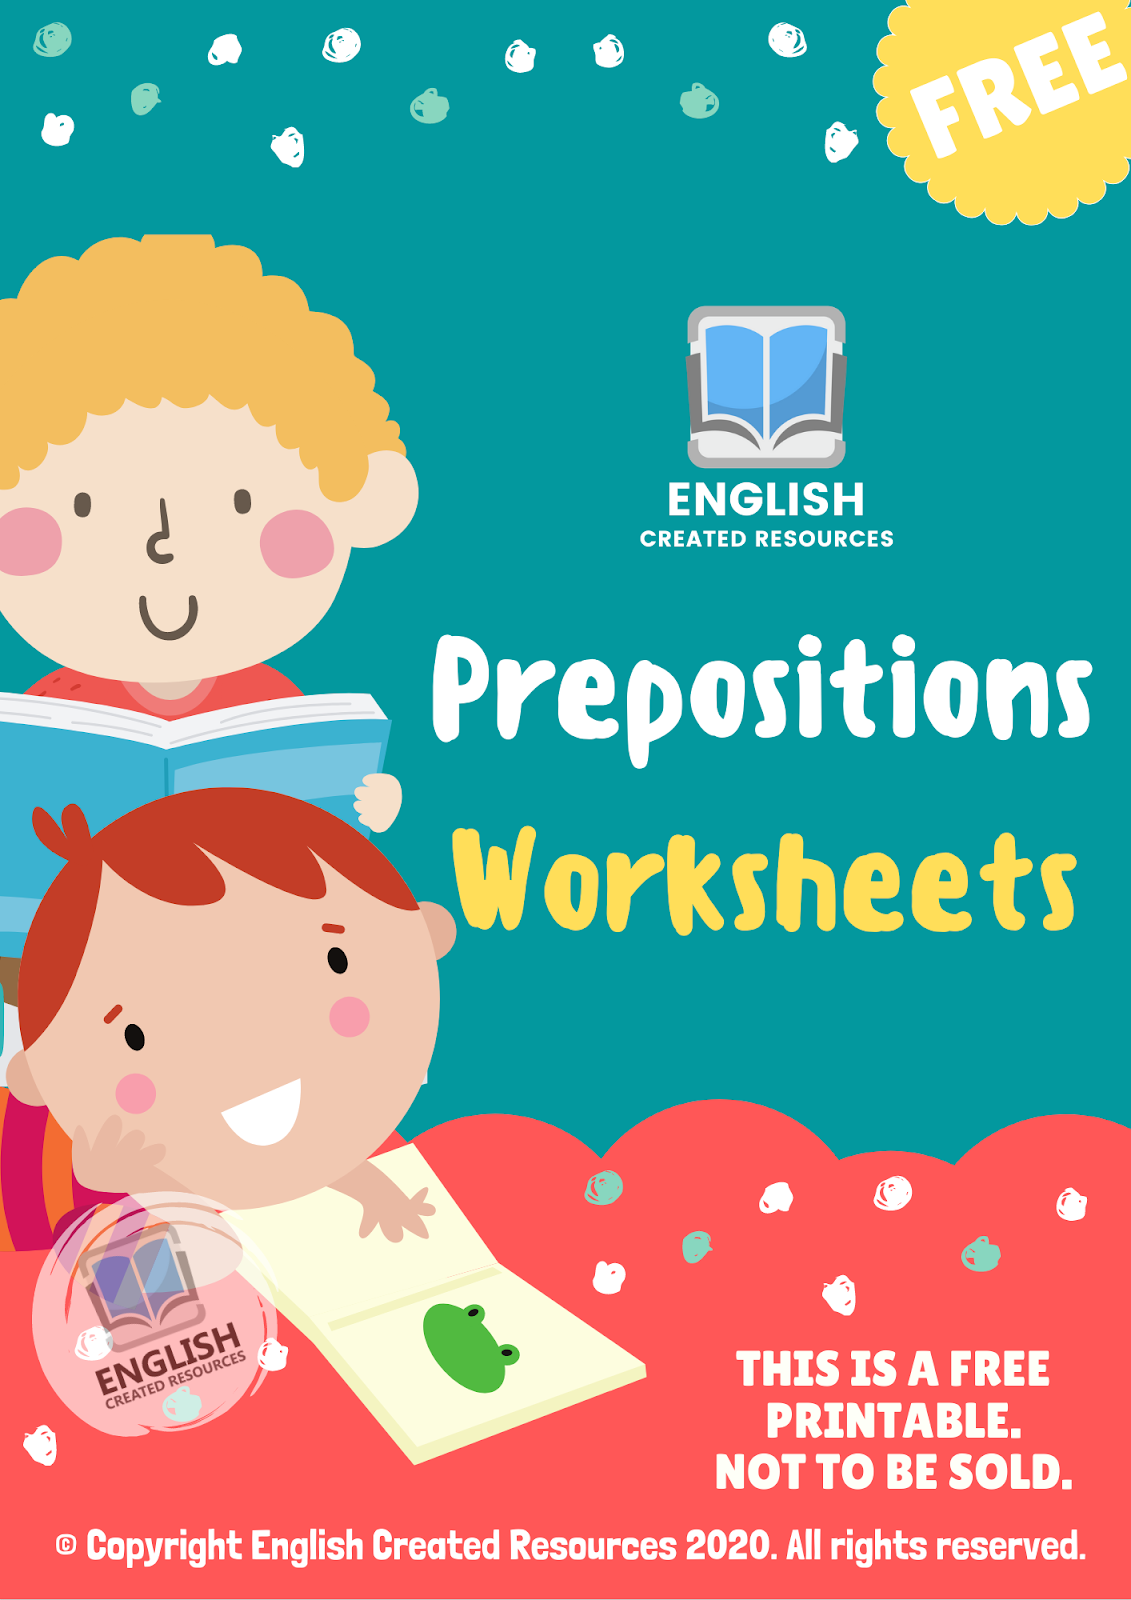 prepositions-worksheets-english-created-resources